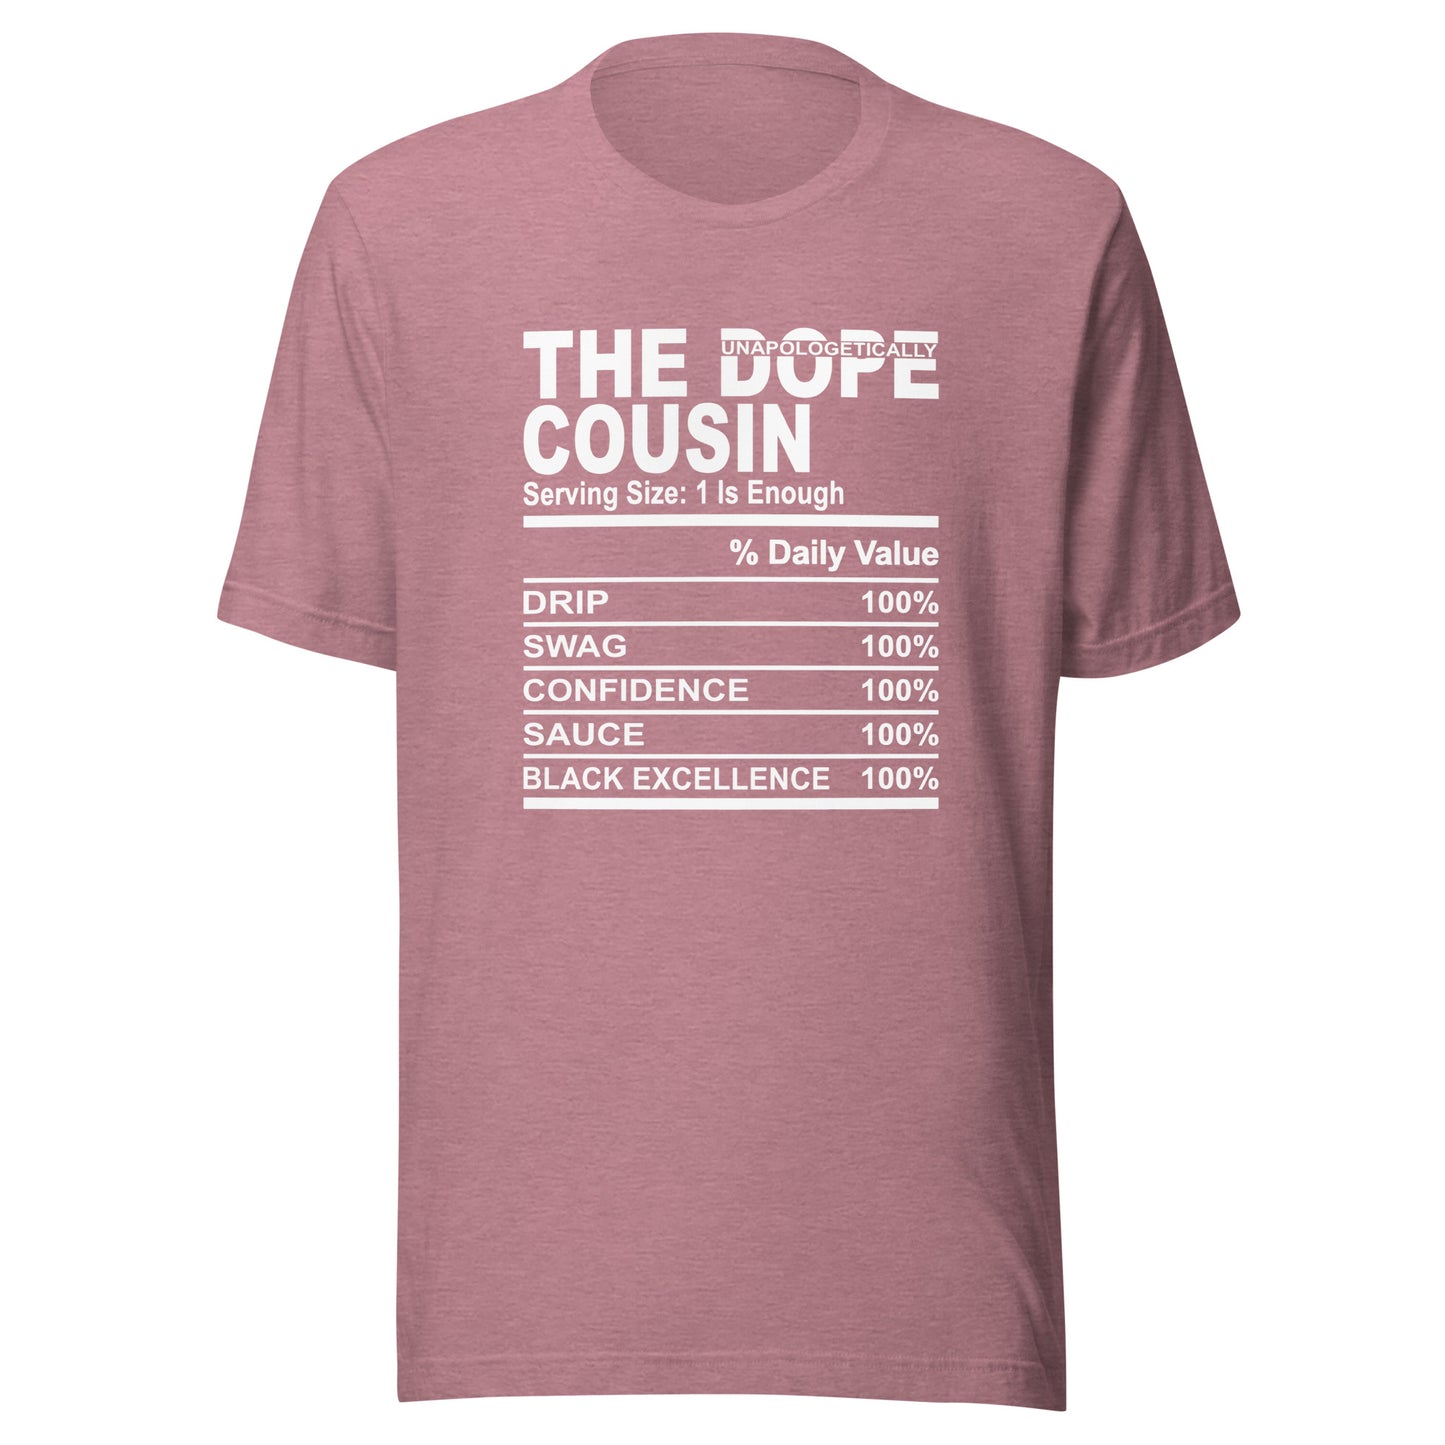 THE DOPE COUSIN (Unapologetically)- 2XL-3XL - Unisex T-Shirt (white print)